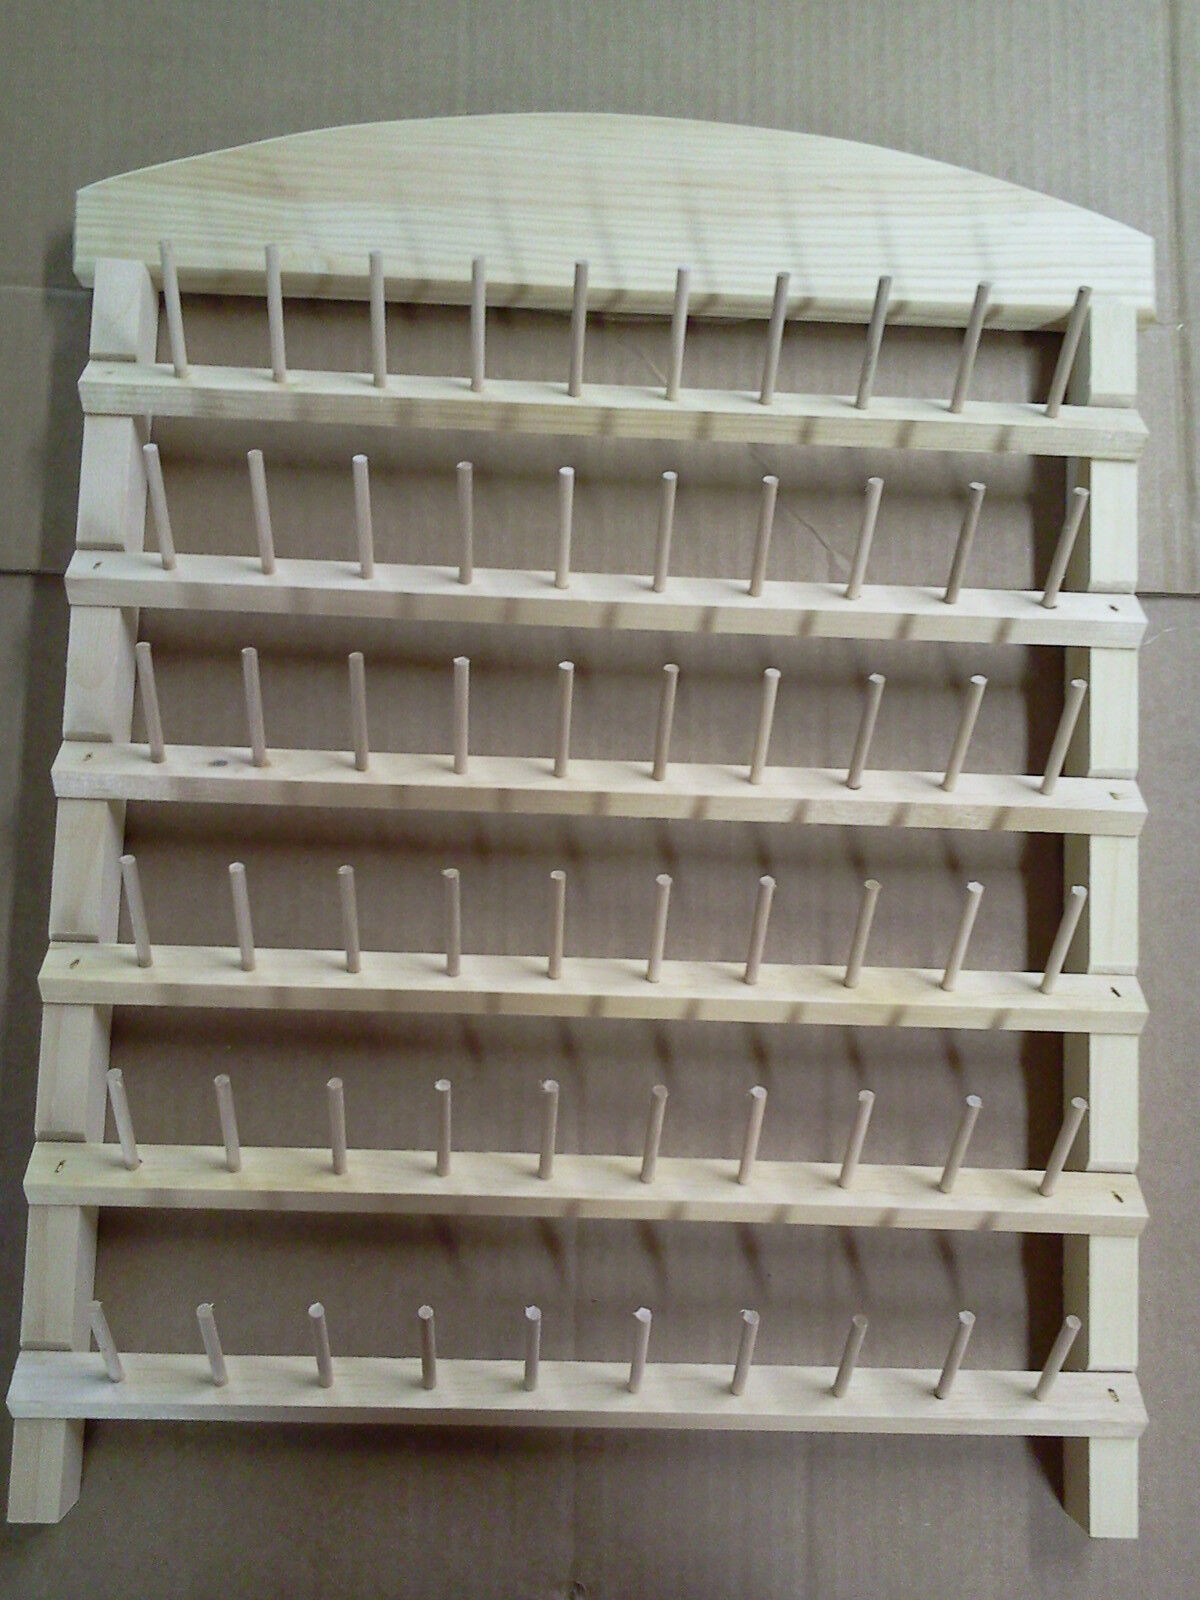 sewing thread rack 60 spool holder unfinished pine wood hand made in USA